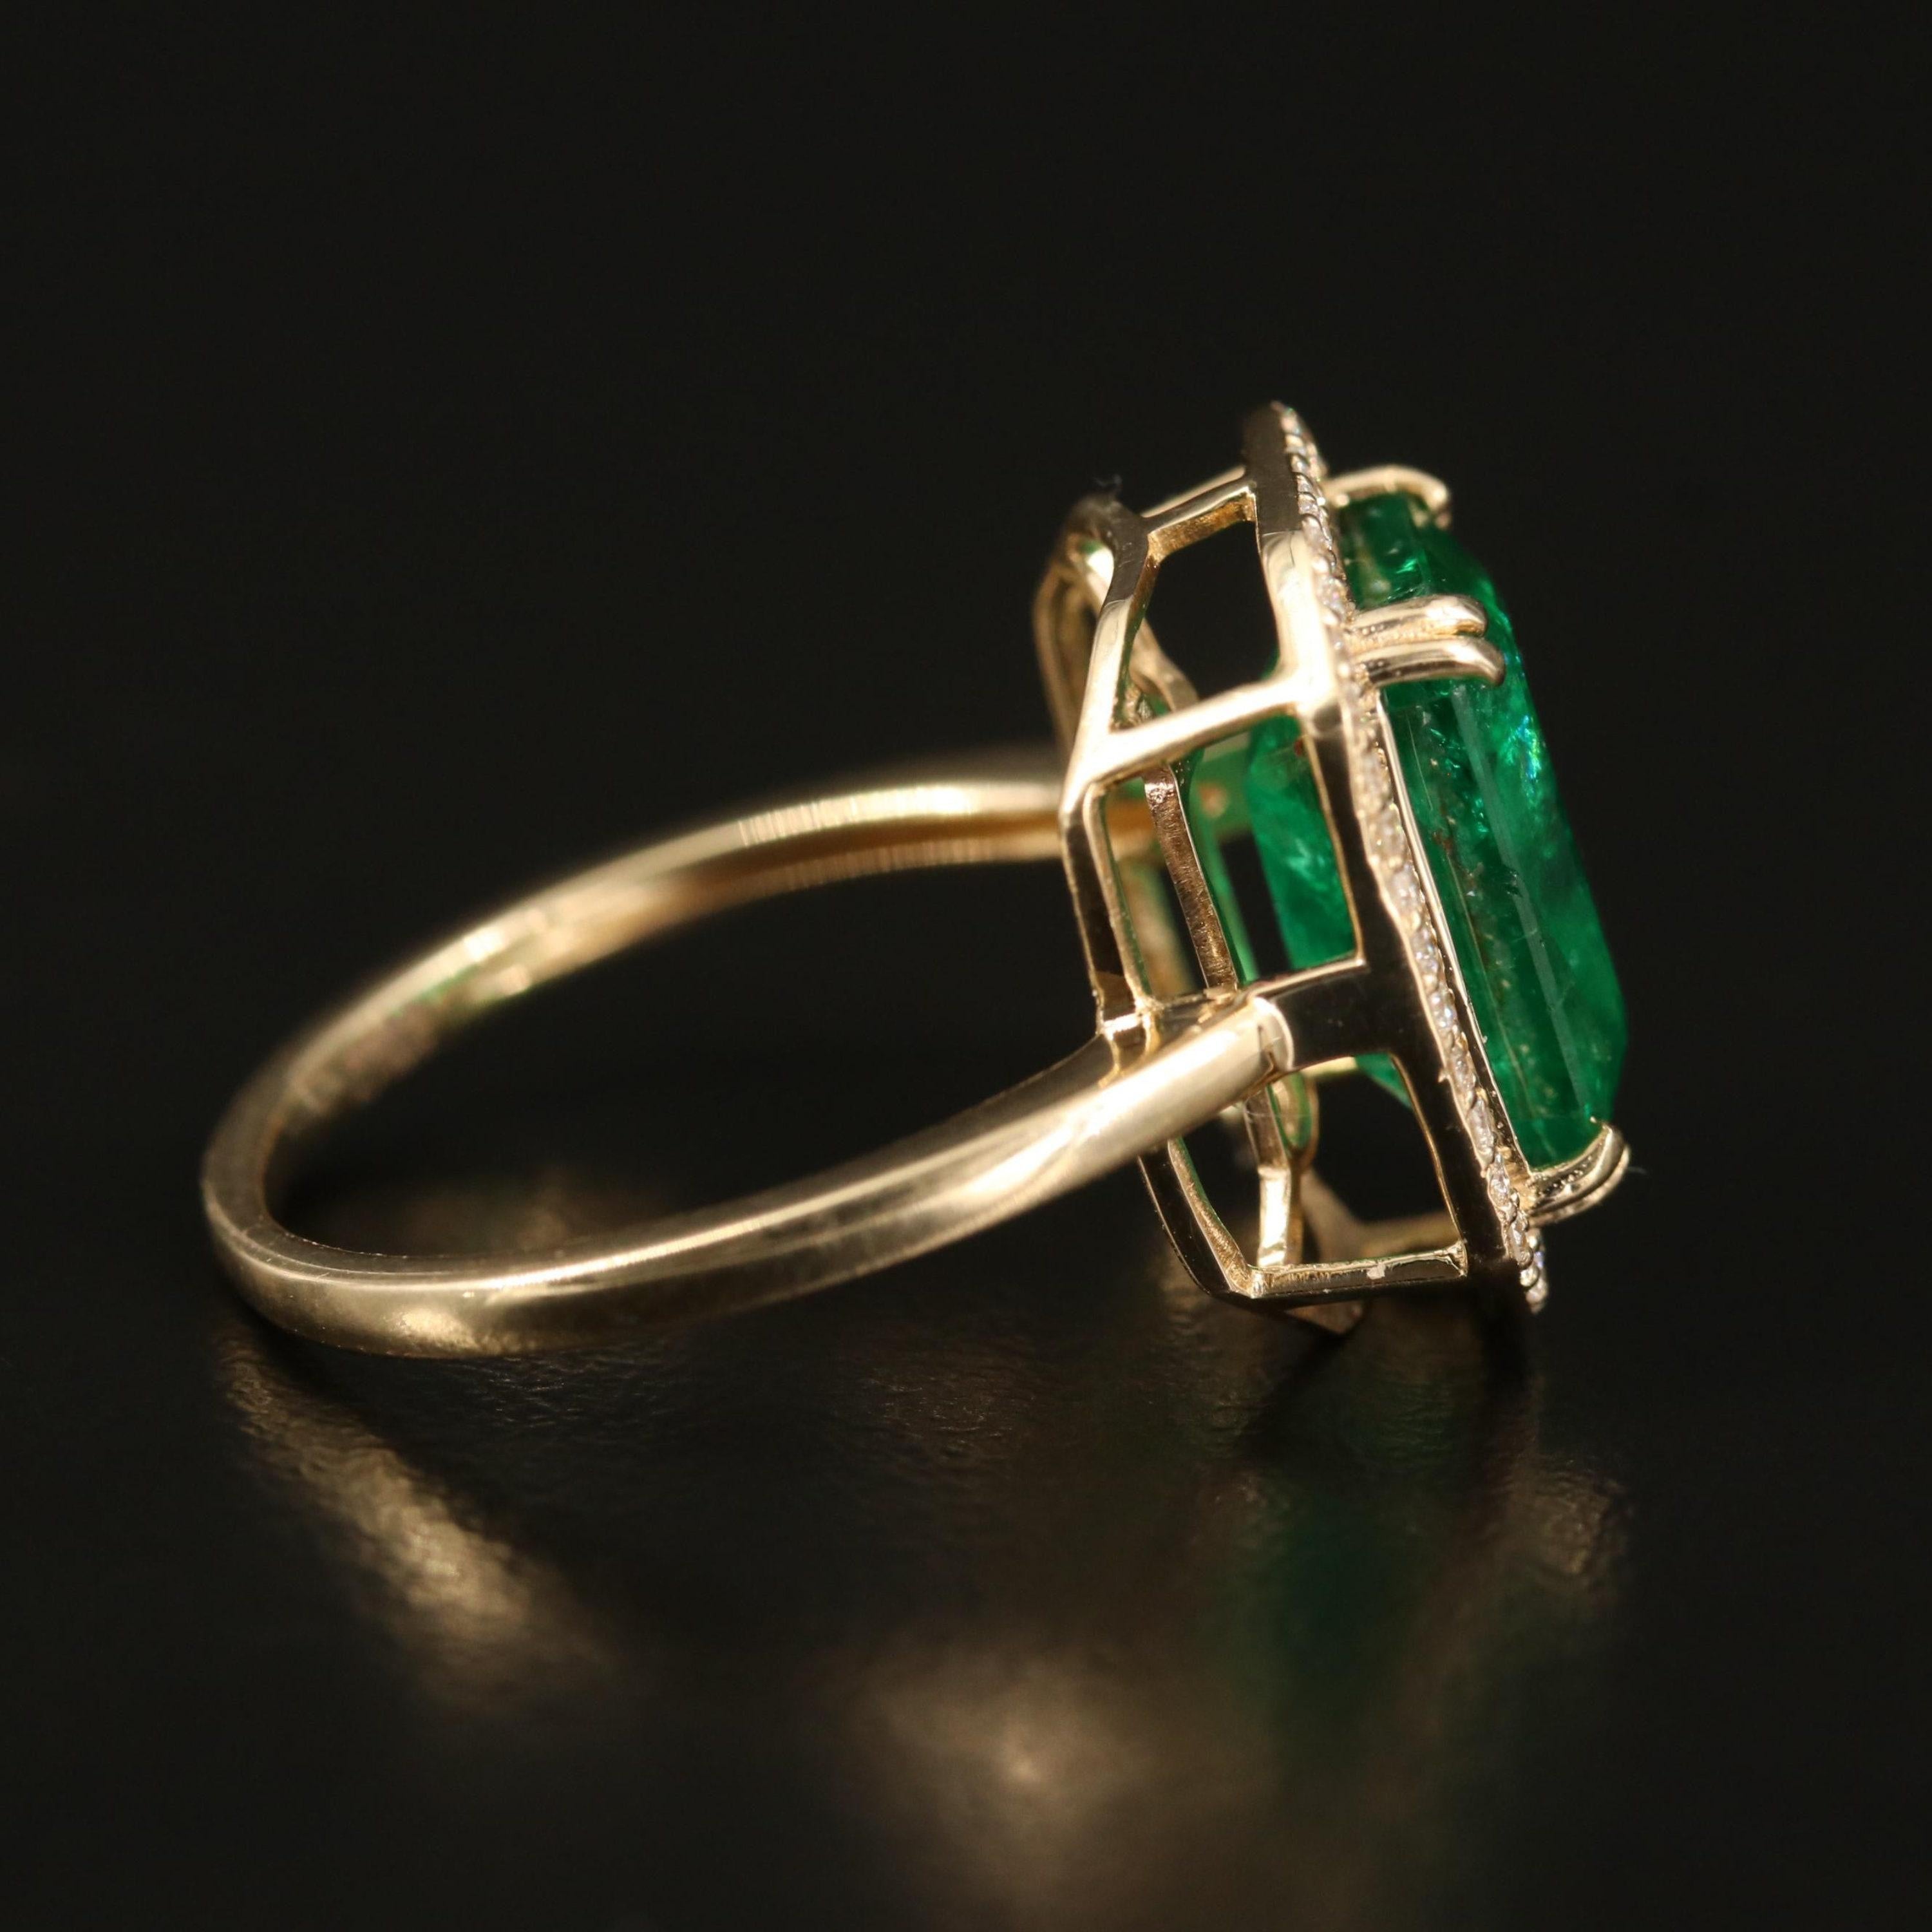 For Sale:  4 Carat Natural Emerald Diamond Engagement Ring Set in 18K Gold, Cocktail Ring 2